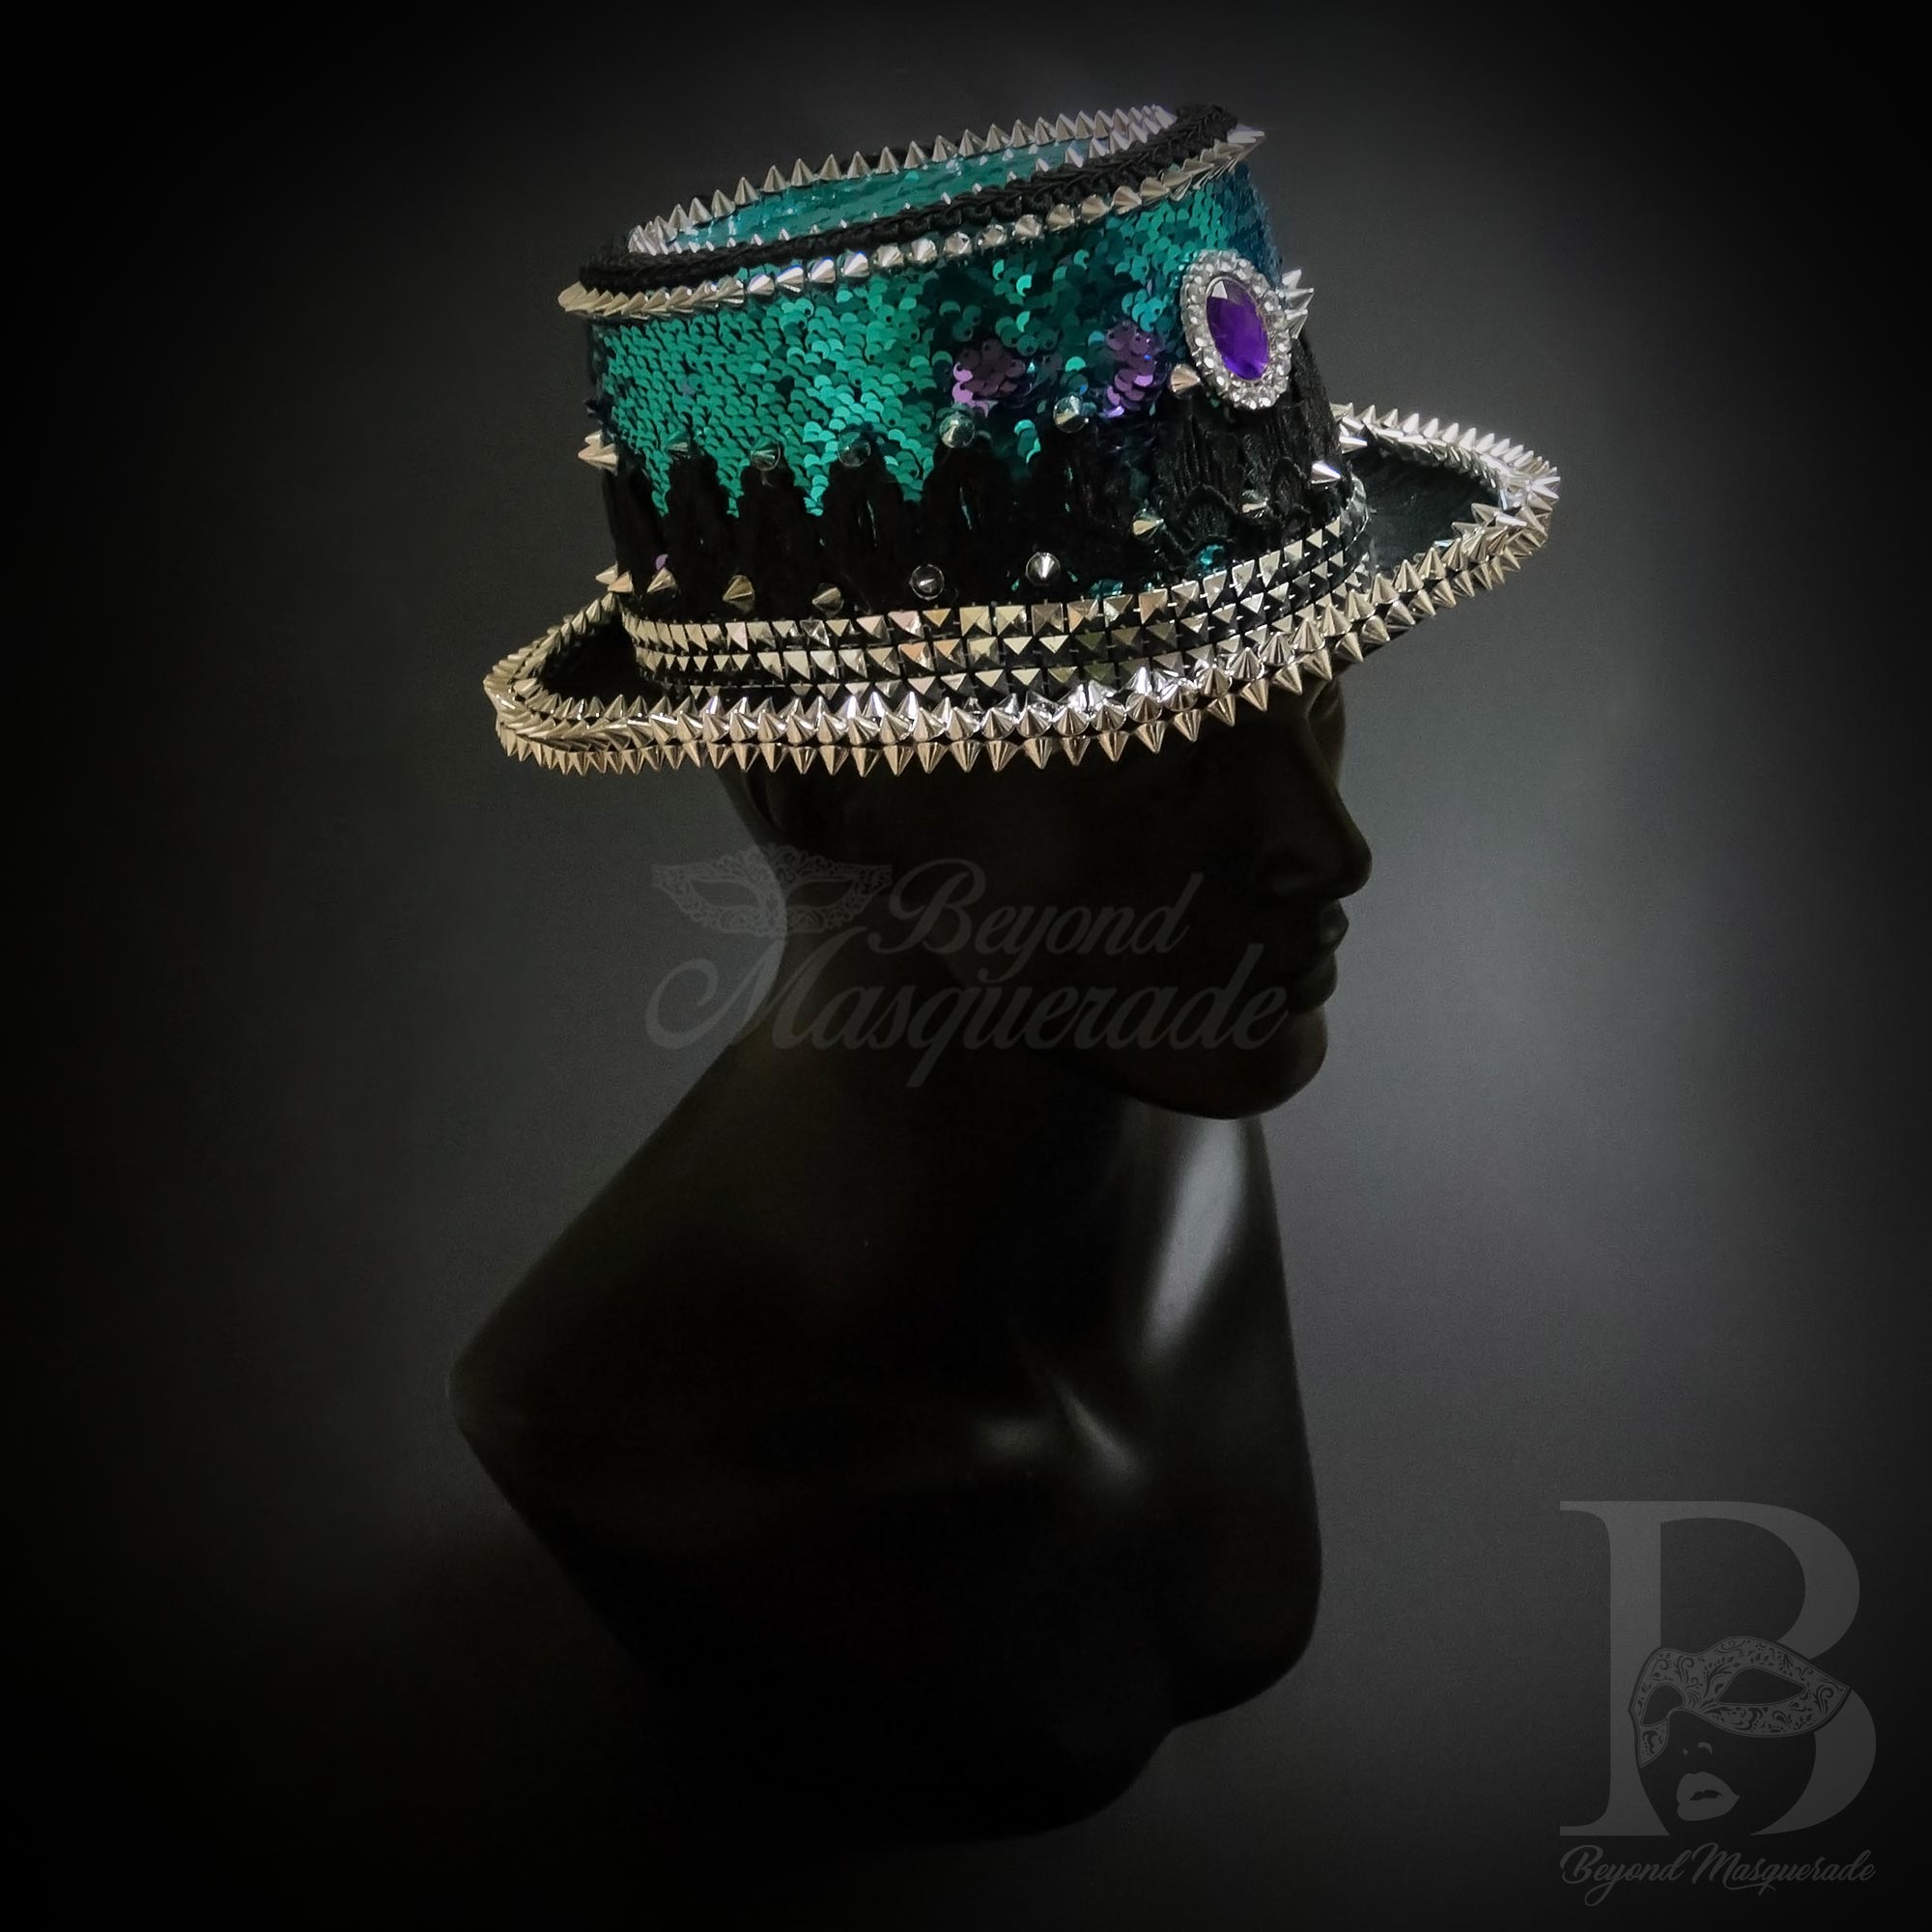 Beyond Masquerade Steampunk Hat: Costume Cosplay Hat with Sequins, Spikes and Gems Iridescent Teal and Purple